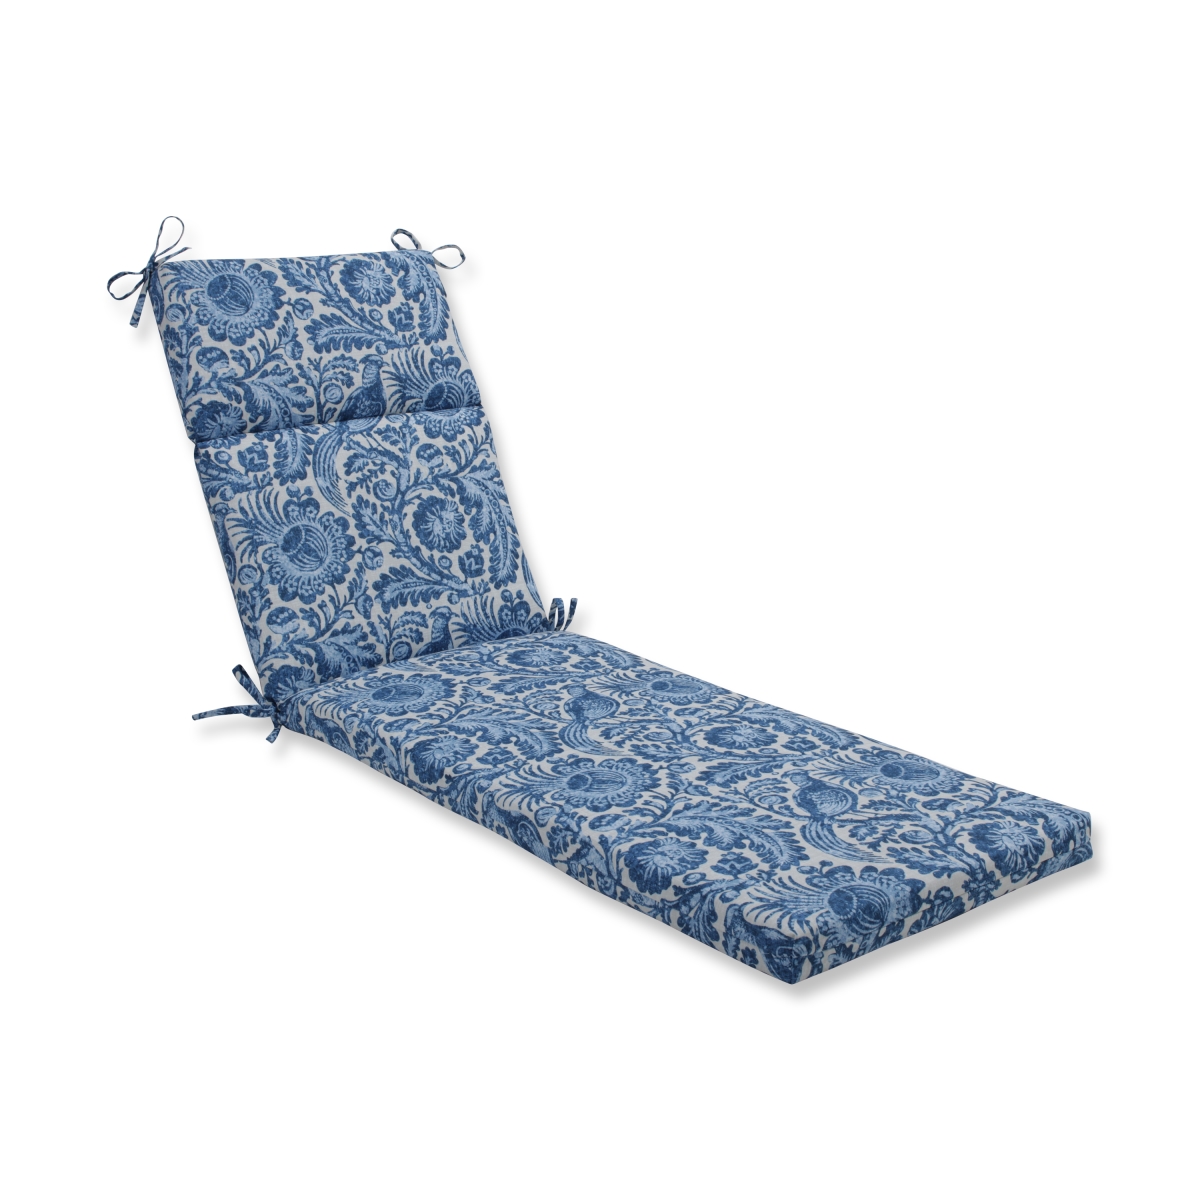 Outdoor & Indoor Tucker Resist Azure Chaise Lounge Cushion, Blue